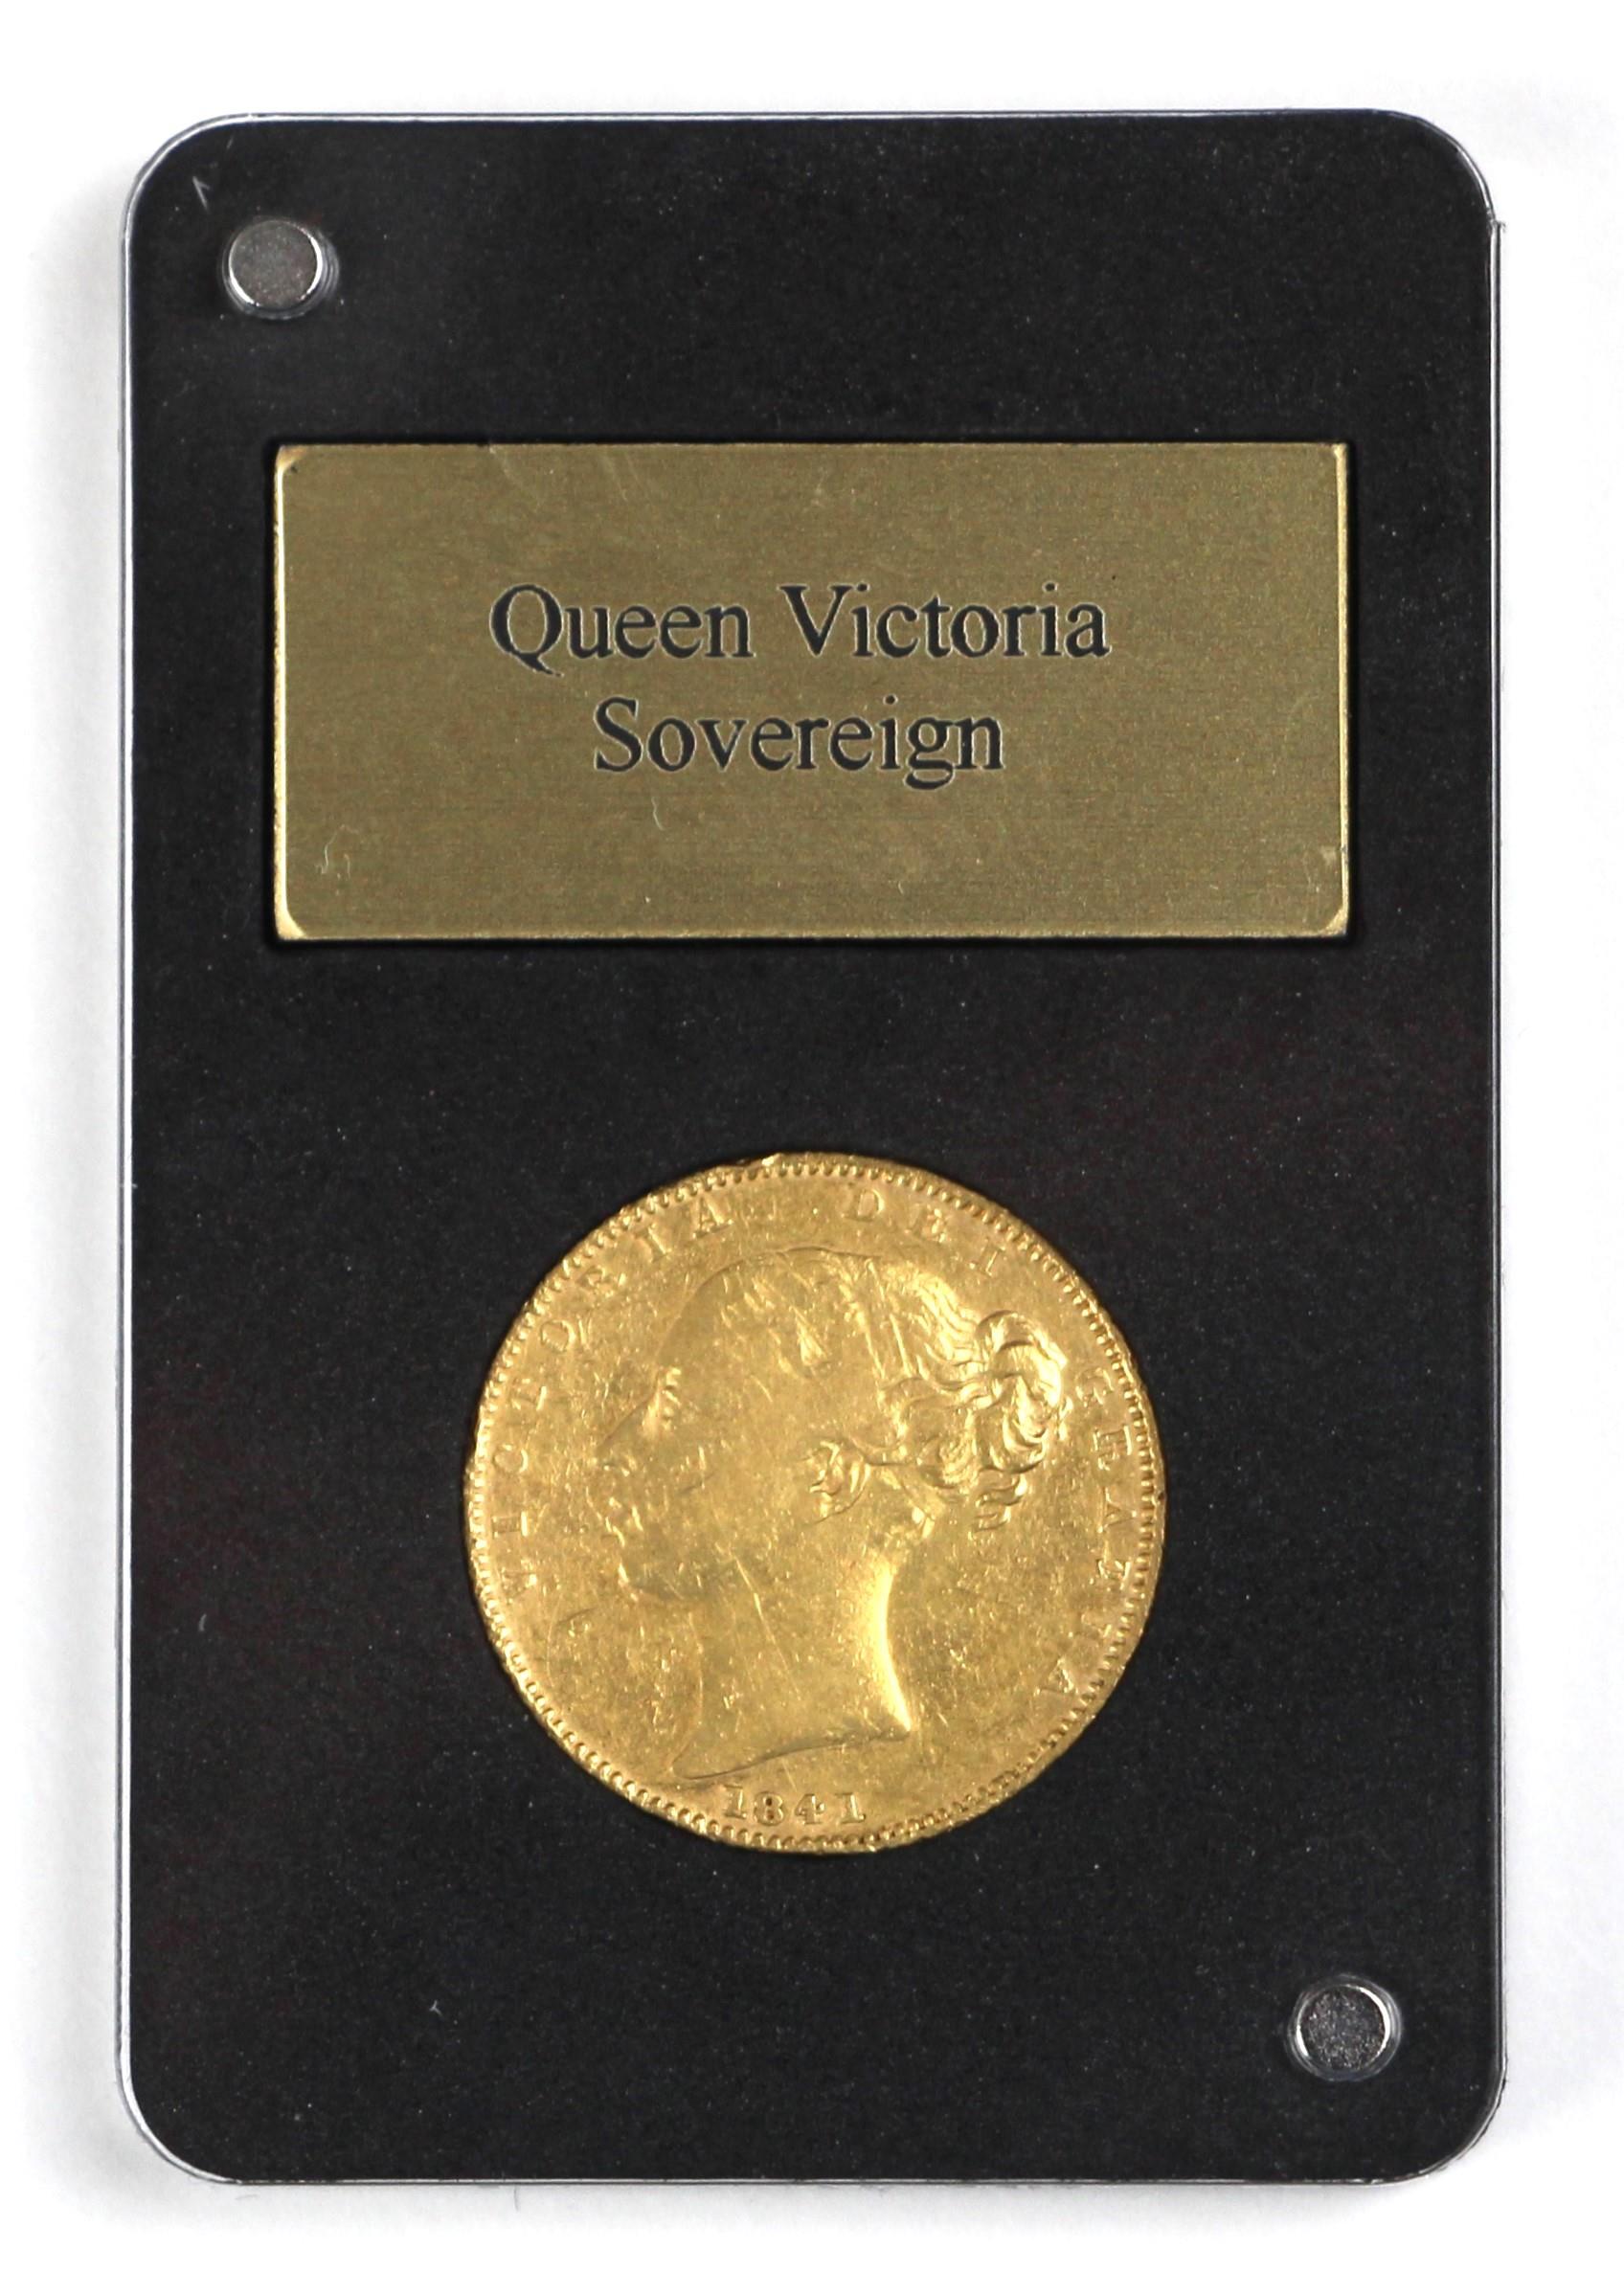 Victoria (1837-1901), Full Sovereign, 1841, unbarred, London Mint, young head Victoria with shield